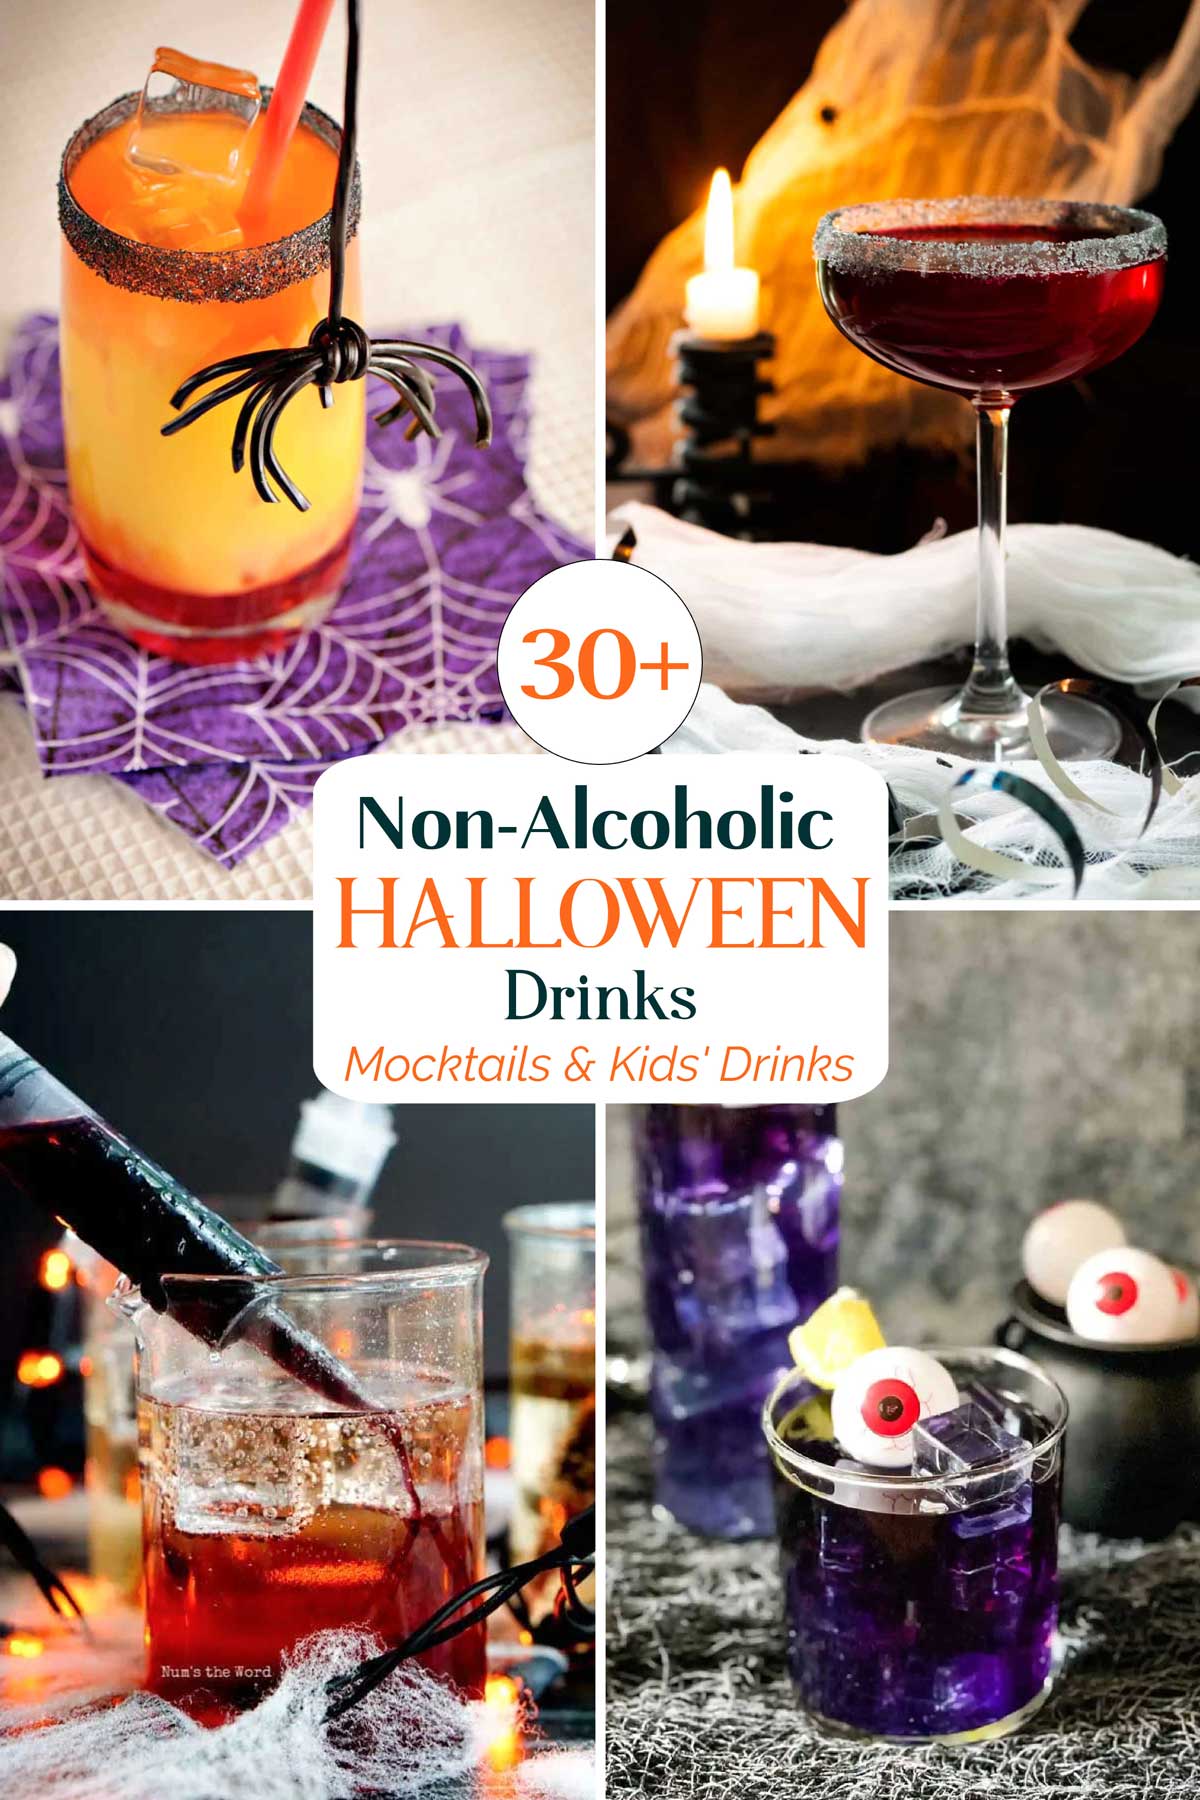 Collage of 4 drink photos with central text "30+ Non-Alcoholic Halloween Drinks mocktails & Kids' Drinks".